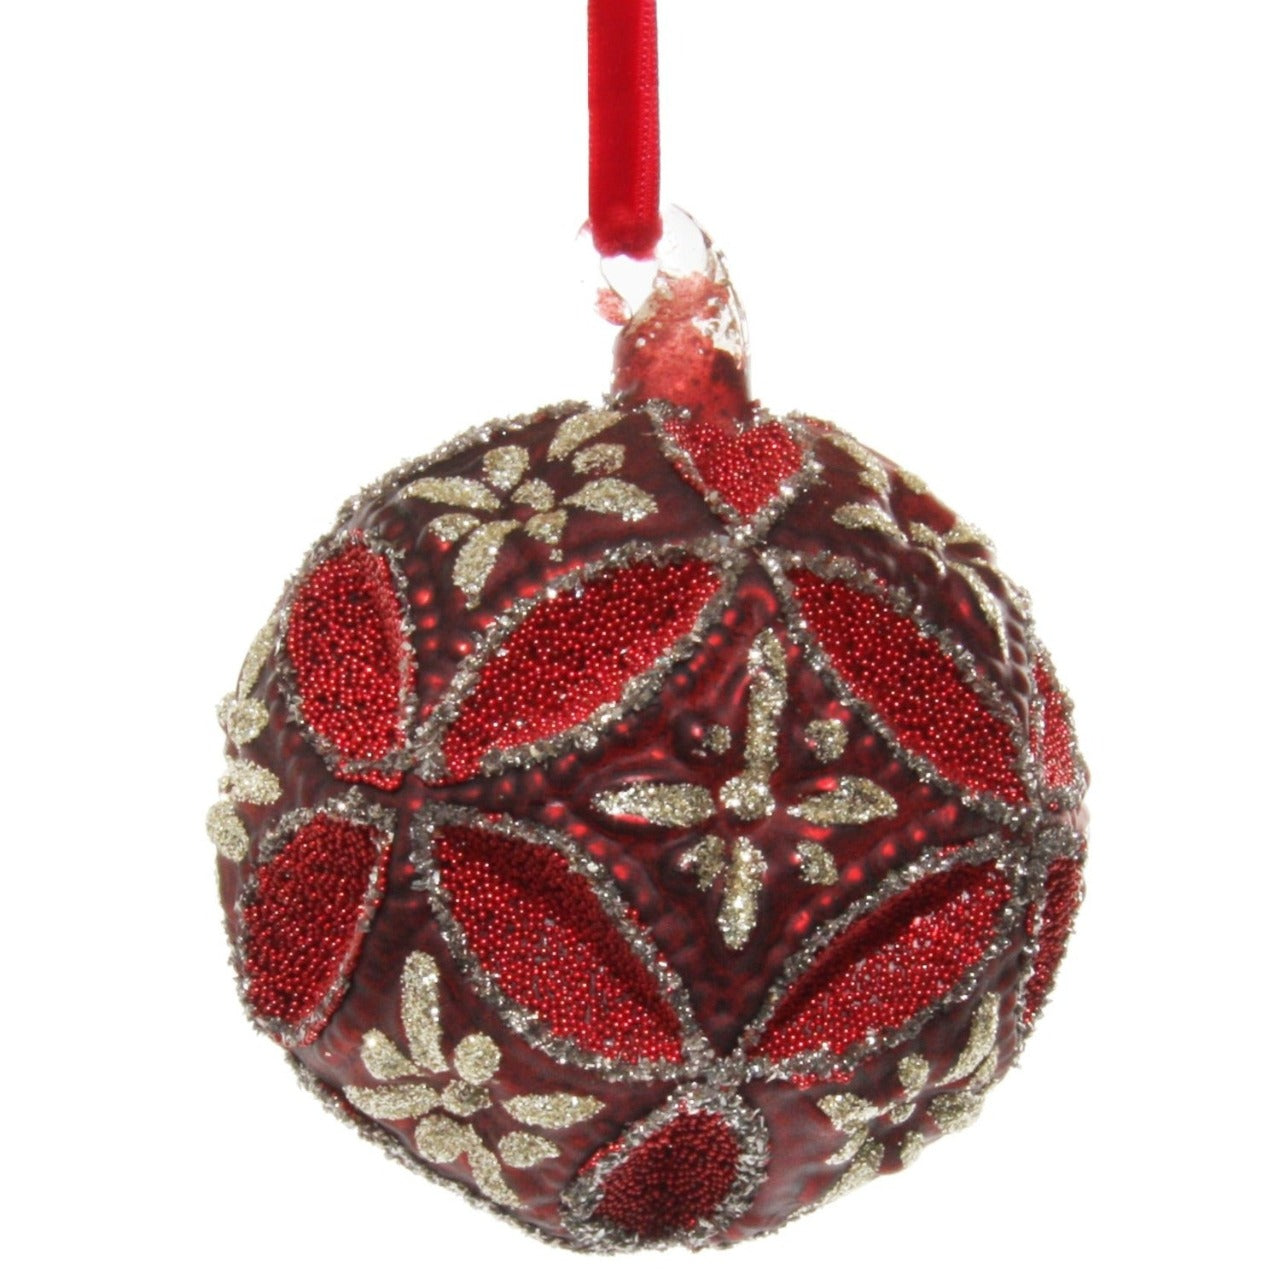 Shishi Burgundy Glass Floral Jewel Ball with Silver Glitter - Set of 6  Browse our beautiful range of luxury festive Christmas tree decorations, baubles & ornaments for your tree this Christmas.Shishi Burgundy Glass Floral Jewel Ball with Silver Glitter - Set of 6  Browse our beautiful range of luxury festive Christmas tree decorations, baubles & ornaments for your tree this Christmas.